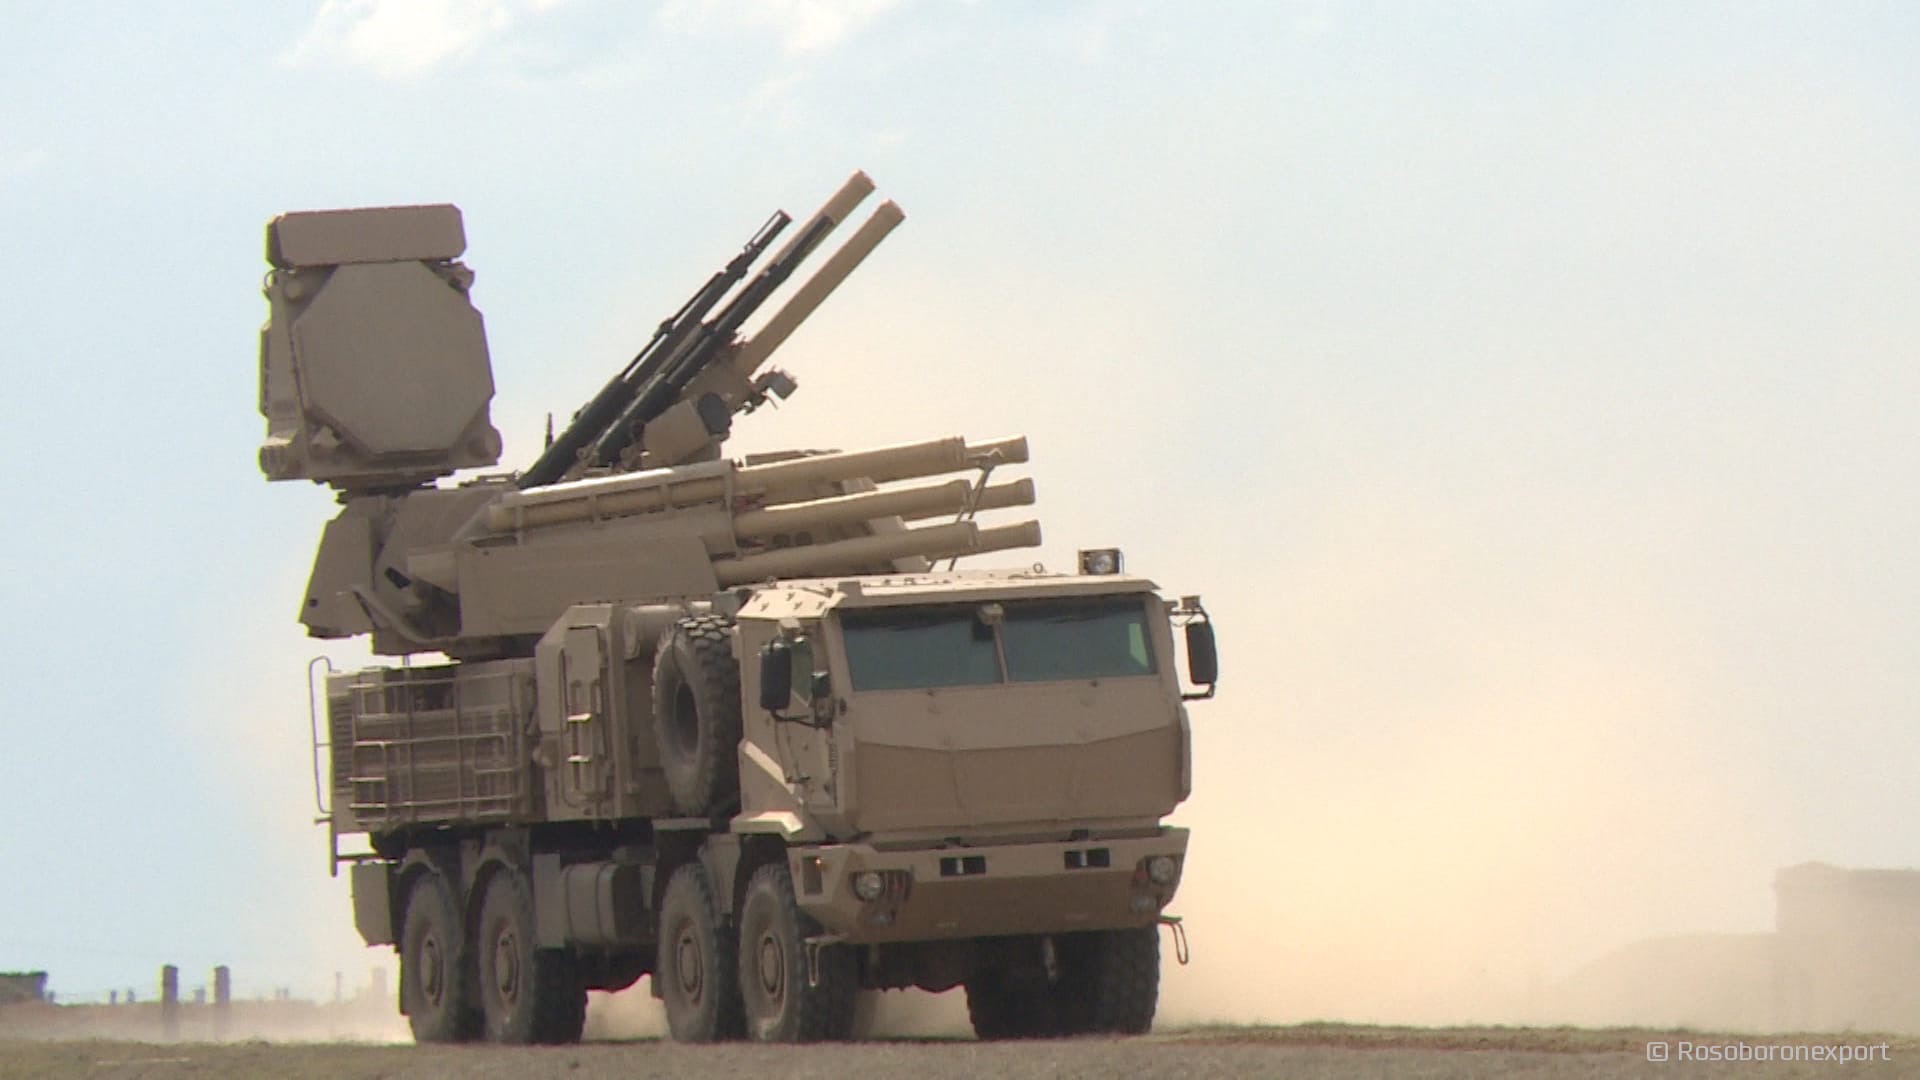 Pantsir missile/gun AD system Thread: #2 - Page 15 FLQF-nLXMAcmGyS?format=jpg&name=large